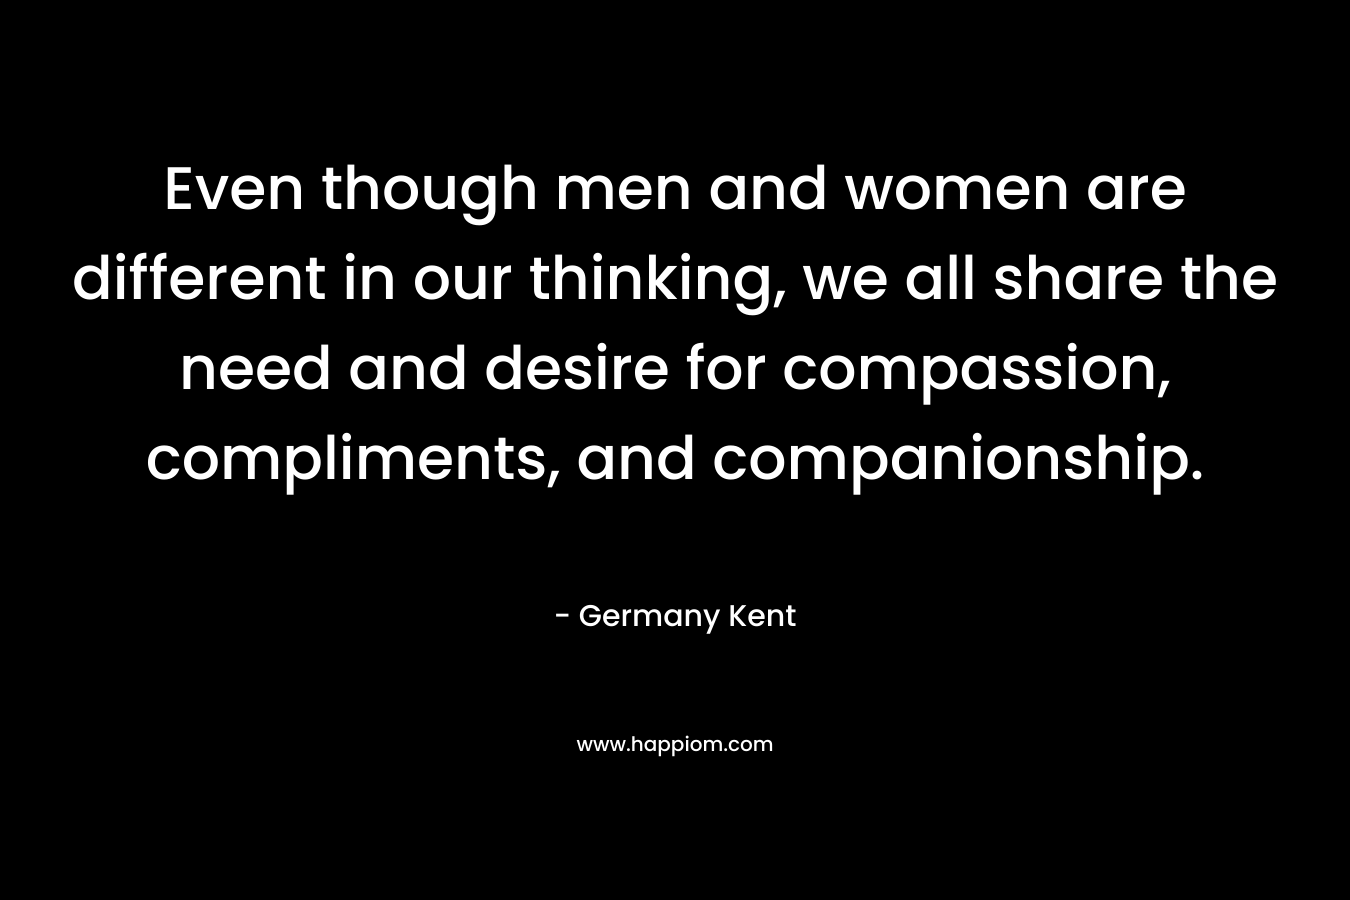 Even though men and women are different in our thinking, we all share the need and desire for compassion, compliments, and companionship.